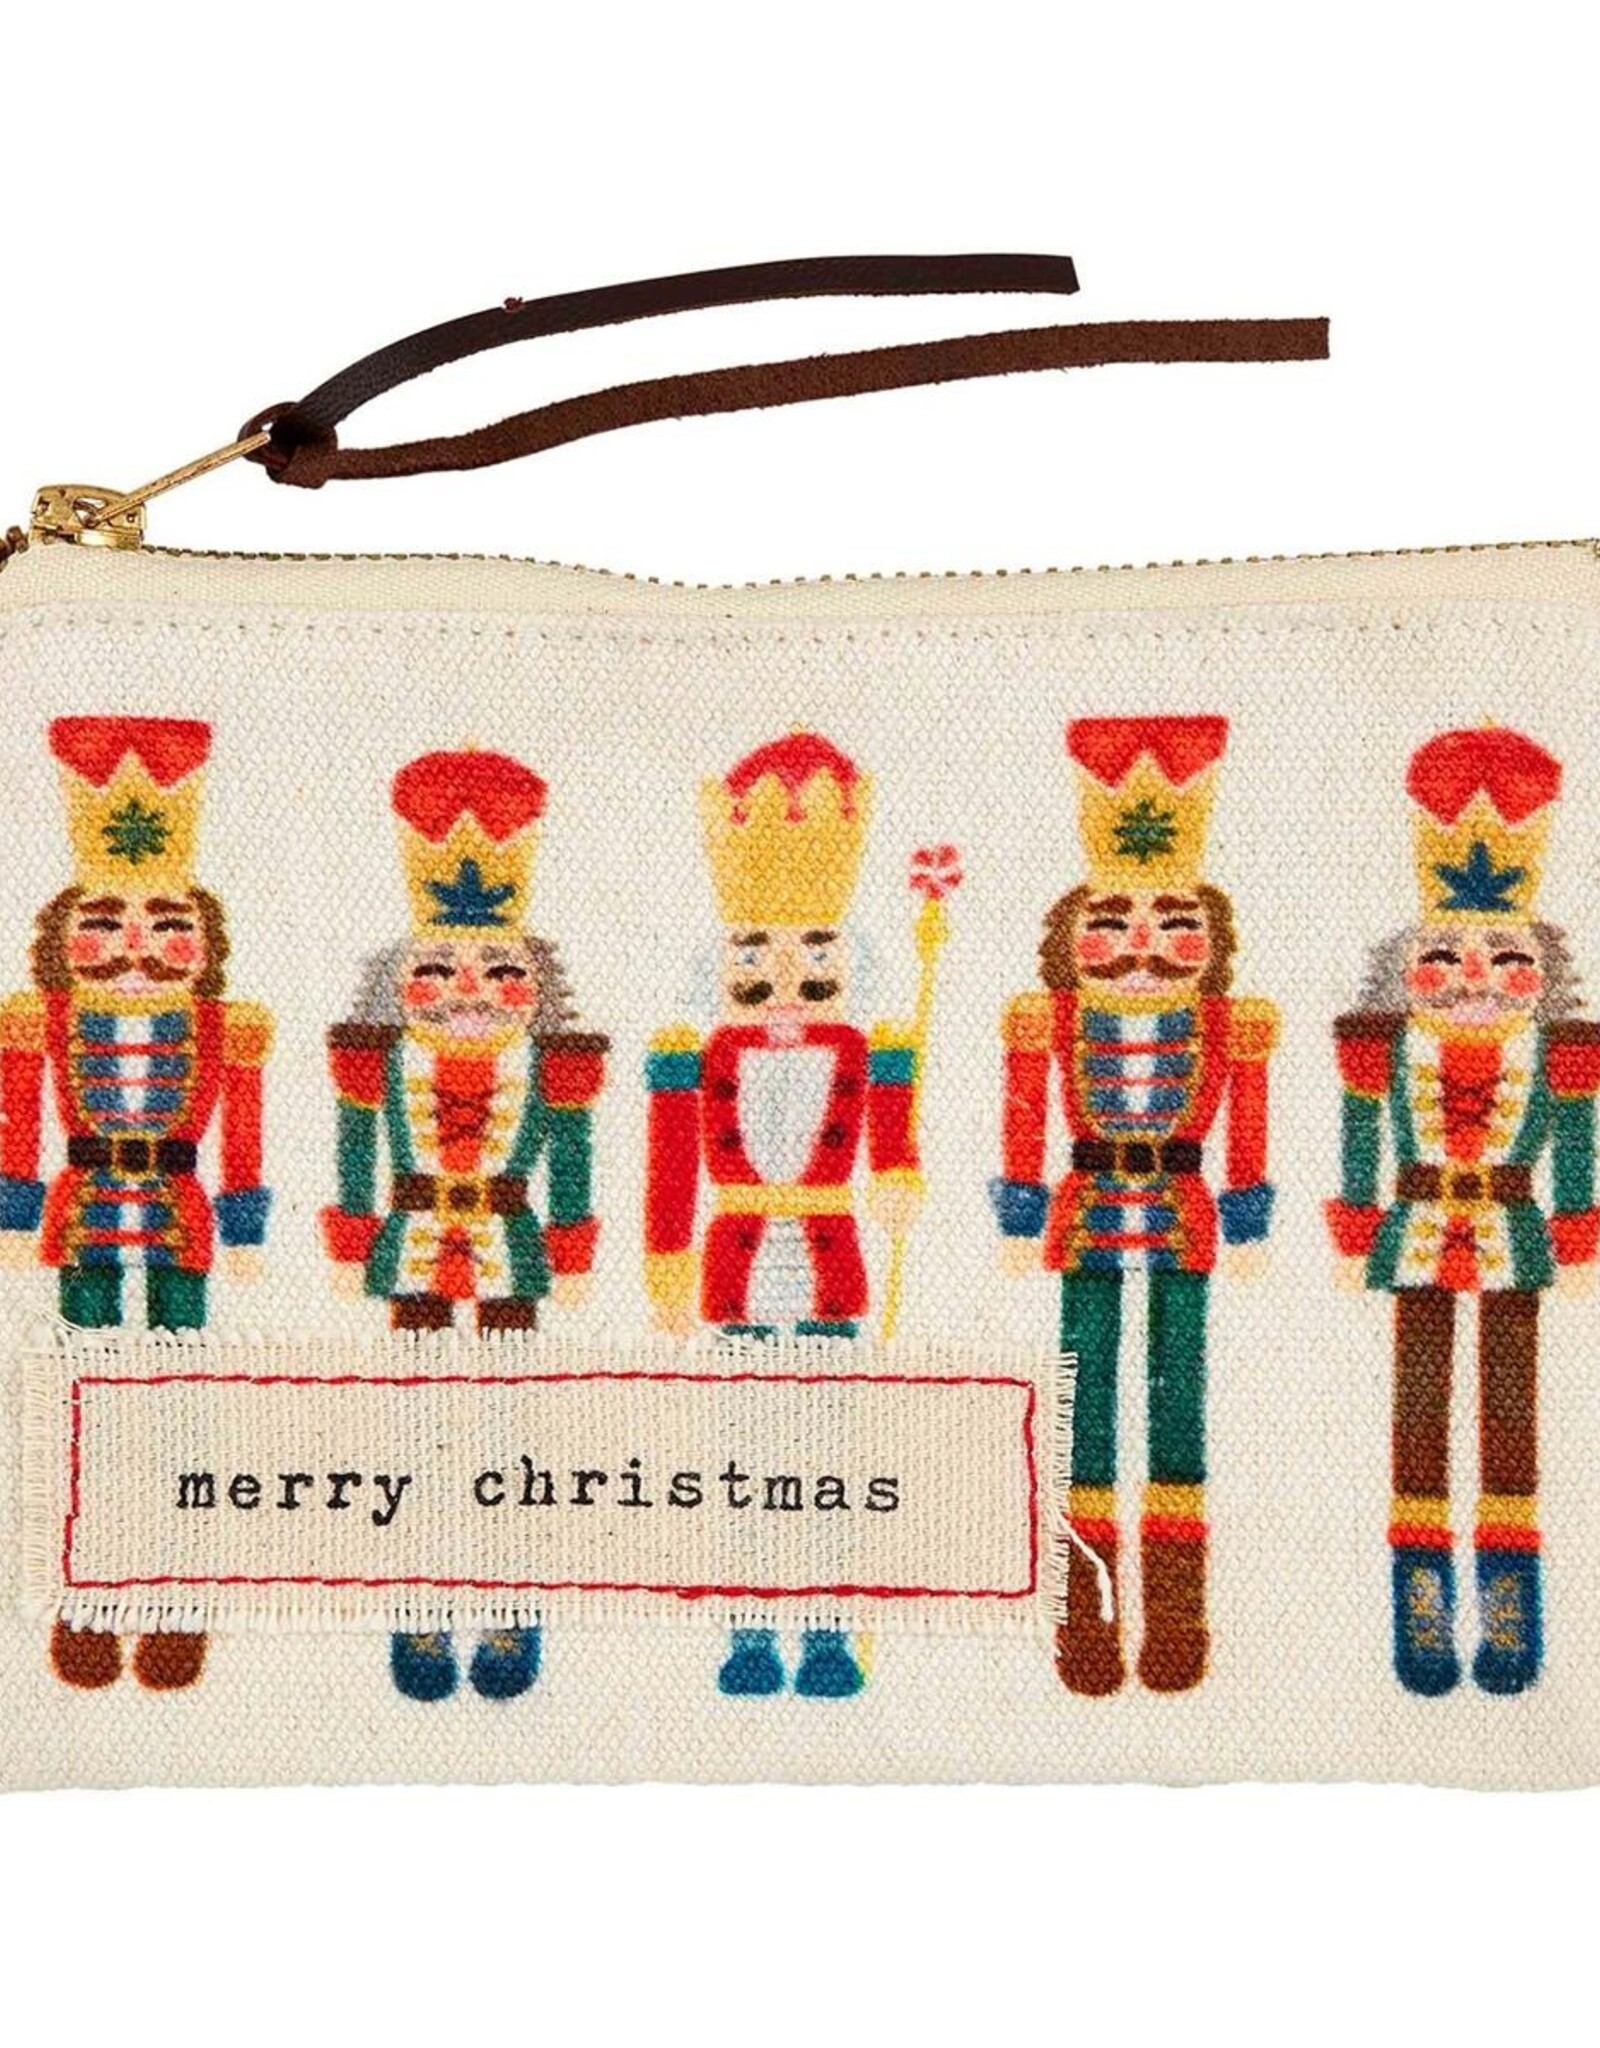 Mud Pie Christmas Gift Card Pouch